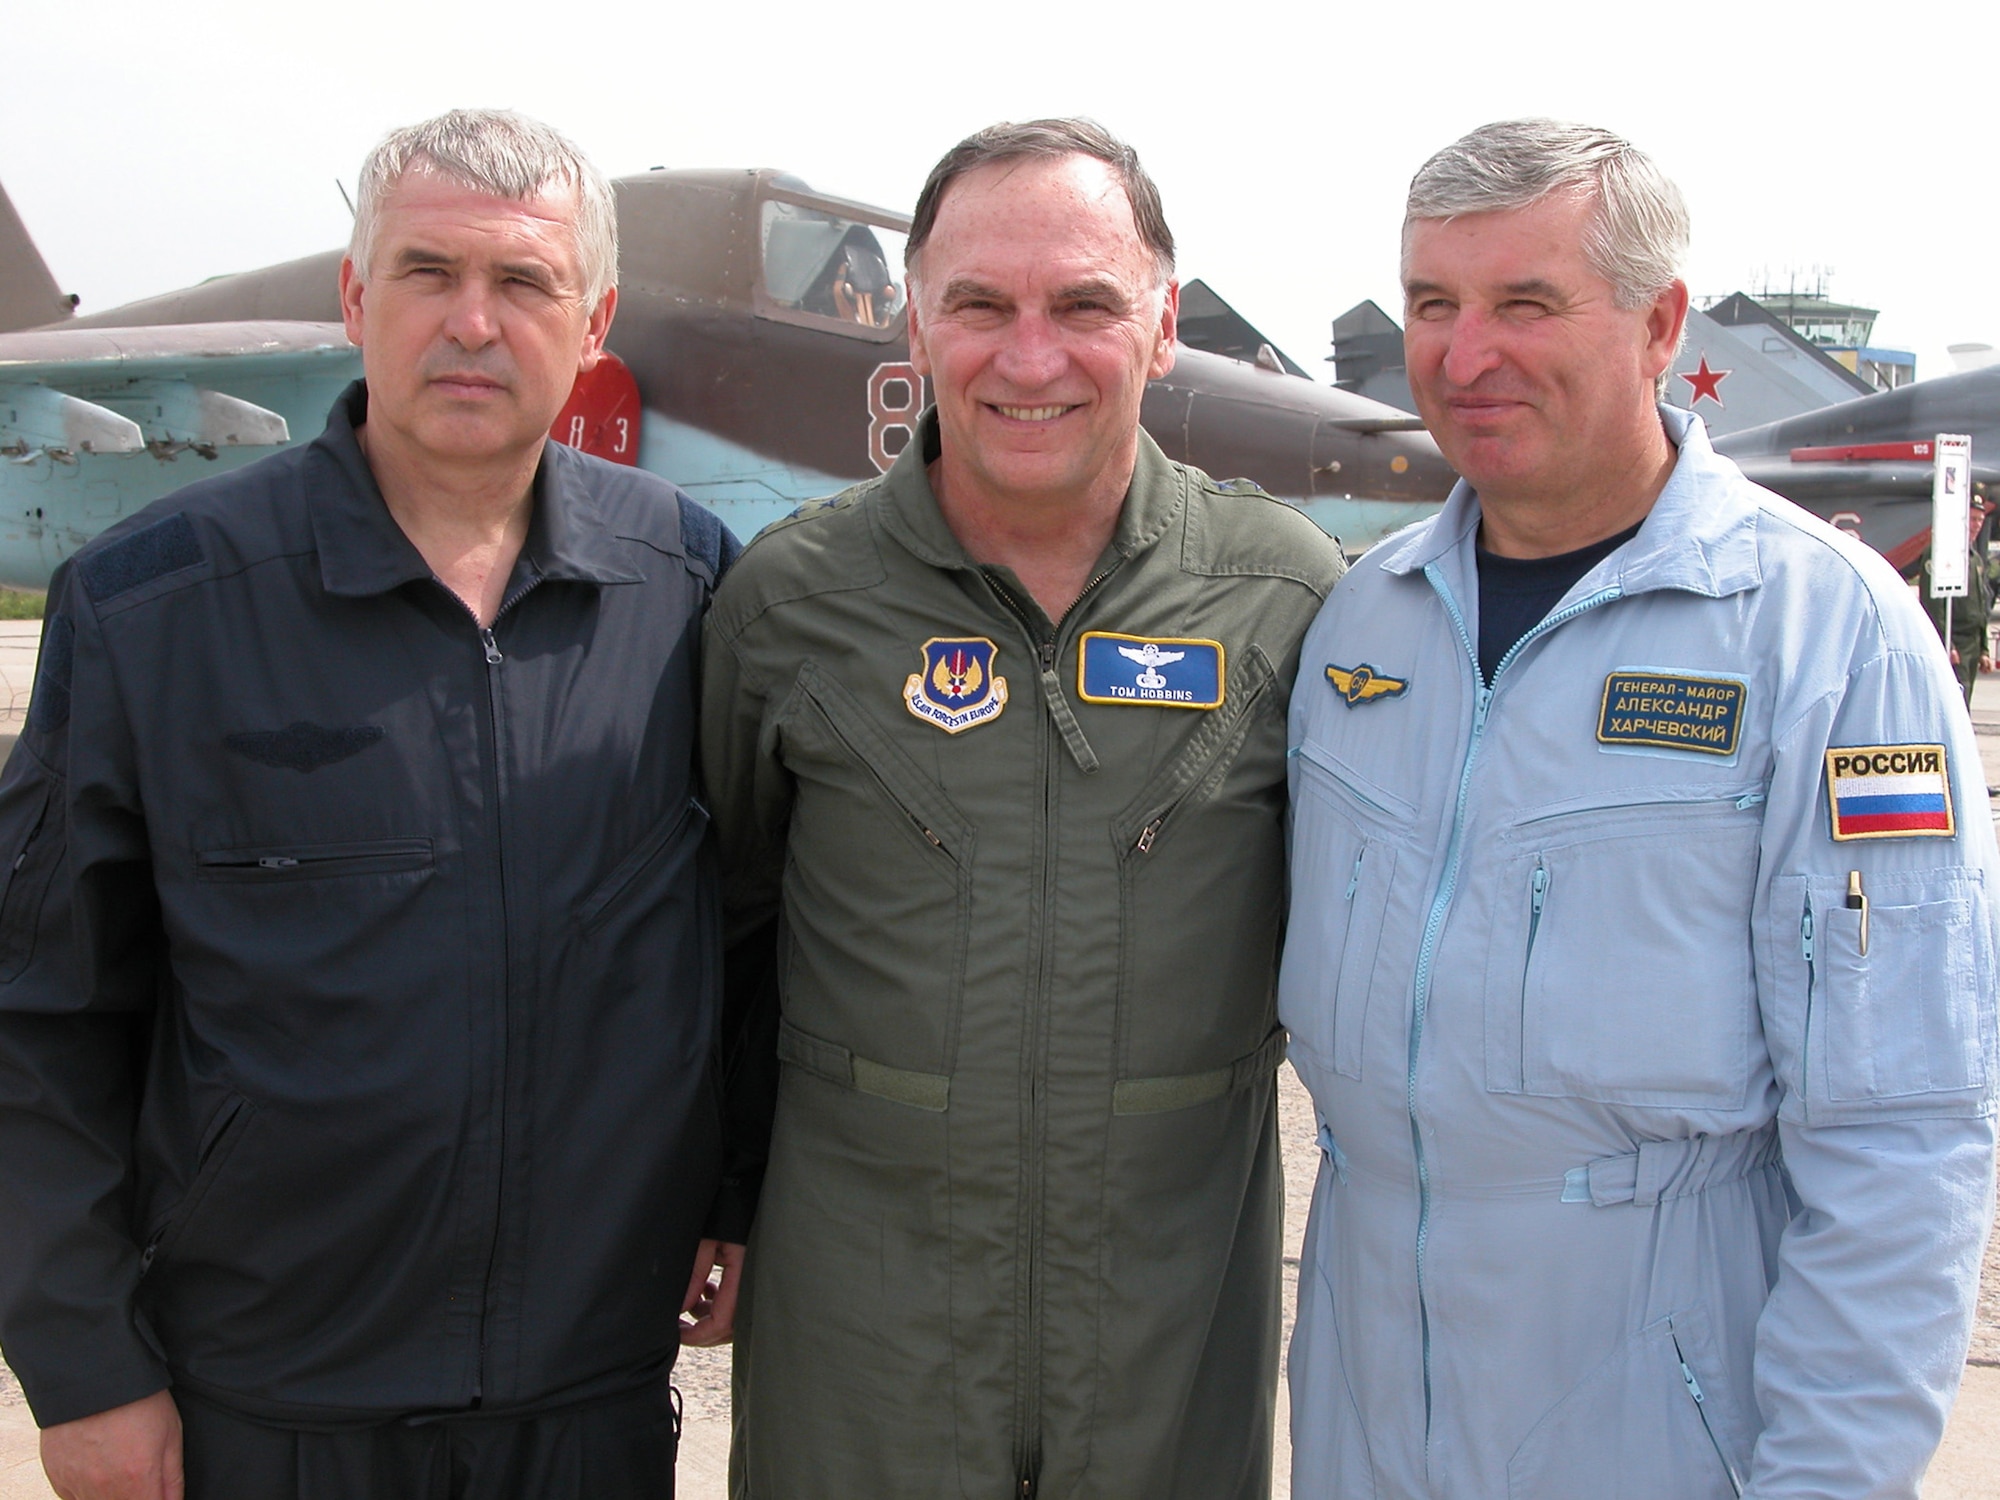 Gen. Tom Hobbins (center), U.S. Air Forces in Europe commander, prepares for his flights with Gen. Col. Aleksandr Zelin (left), deputy commander in chief of the Russian Federation Air Force, and Gen. Maj. Aleksandr Kharchevskiy, chief of the 4th Center for Combat Use and Flight Training, on Aug. 15. General Hobbins, who is in Russia Aug. 14 to 17 to bolster relationships and security cooperation between U.S. and Russian air forces, flew in both the SU-27 Flanker and MiG-29 Fulcrum during his visit to Lipetsk Air Base. (U.S. Air Force photo/Capt. Russell Montante) 
